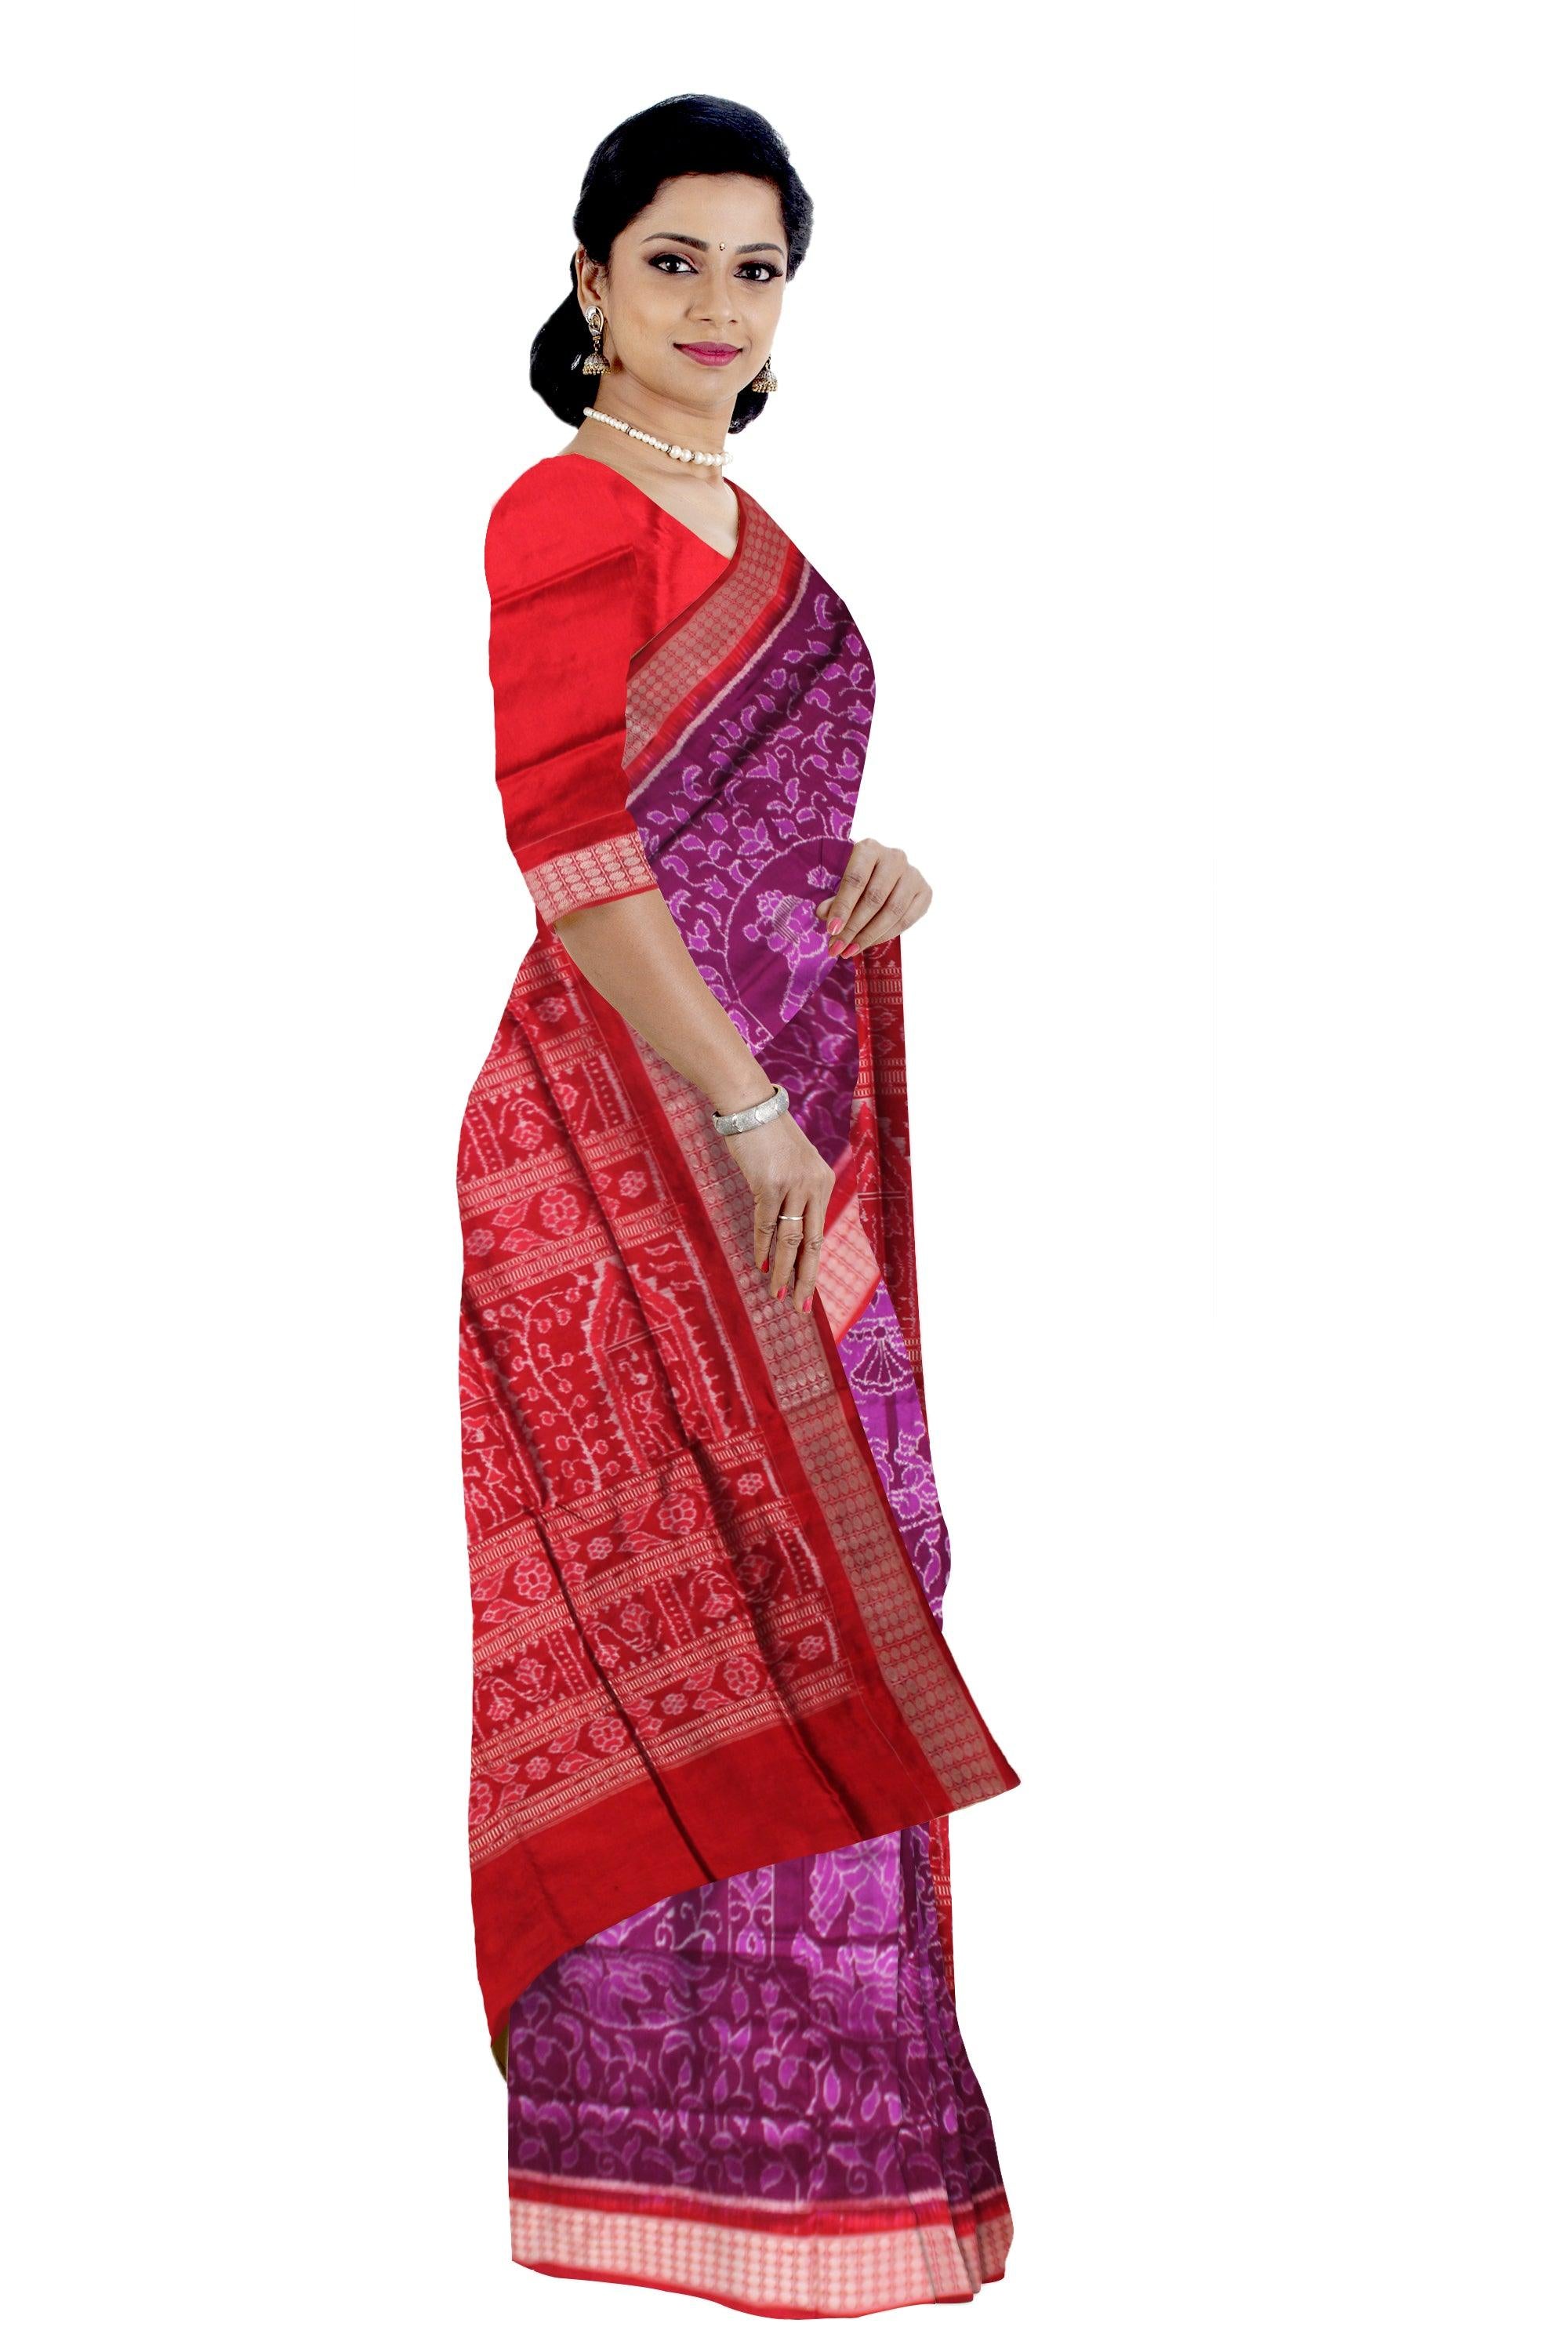 A SONEPUR NARTAKI SAREE IN  PURPLE AND RED COLOR , WITH BLOUSE PIECE. - Koshali Arts & Crafts Enterprise